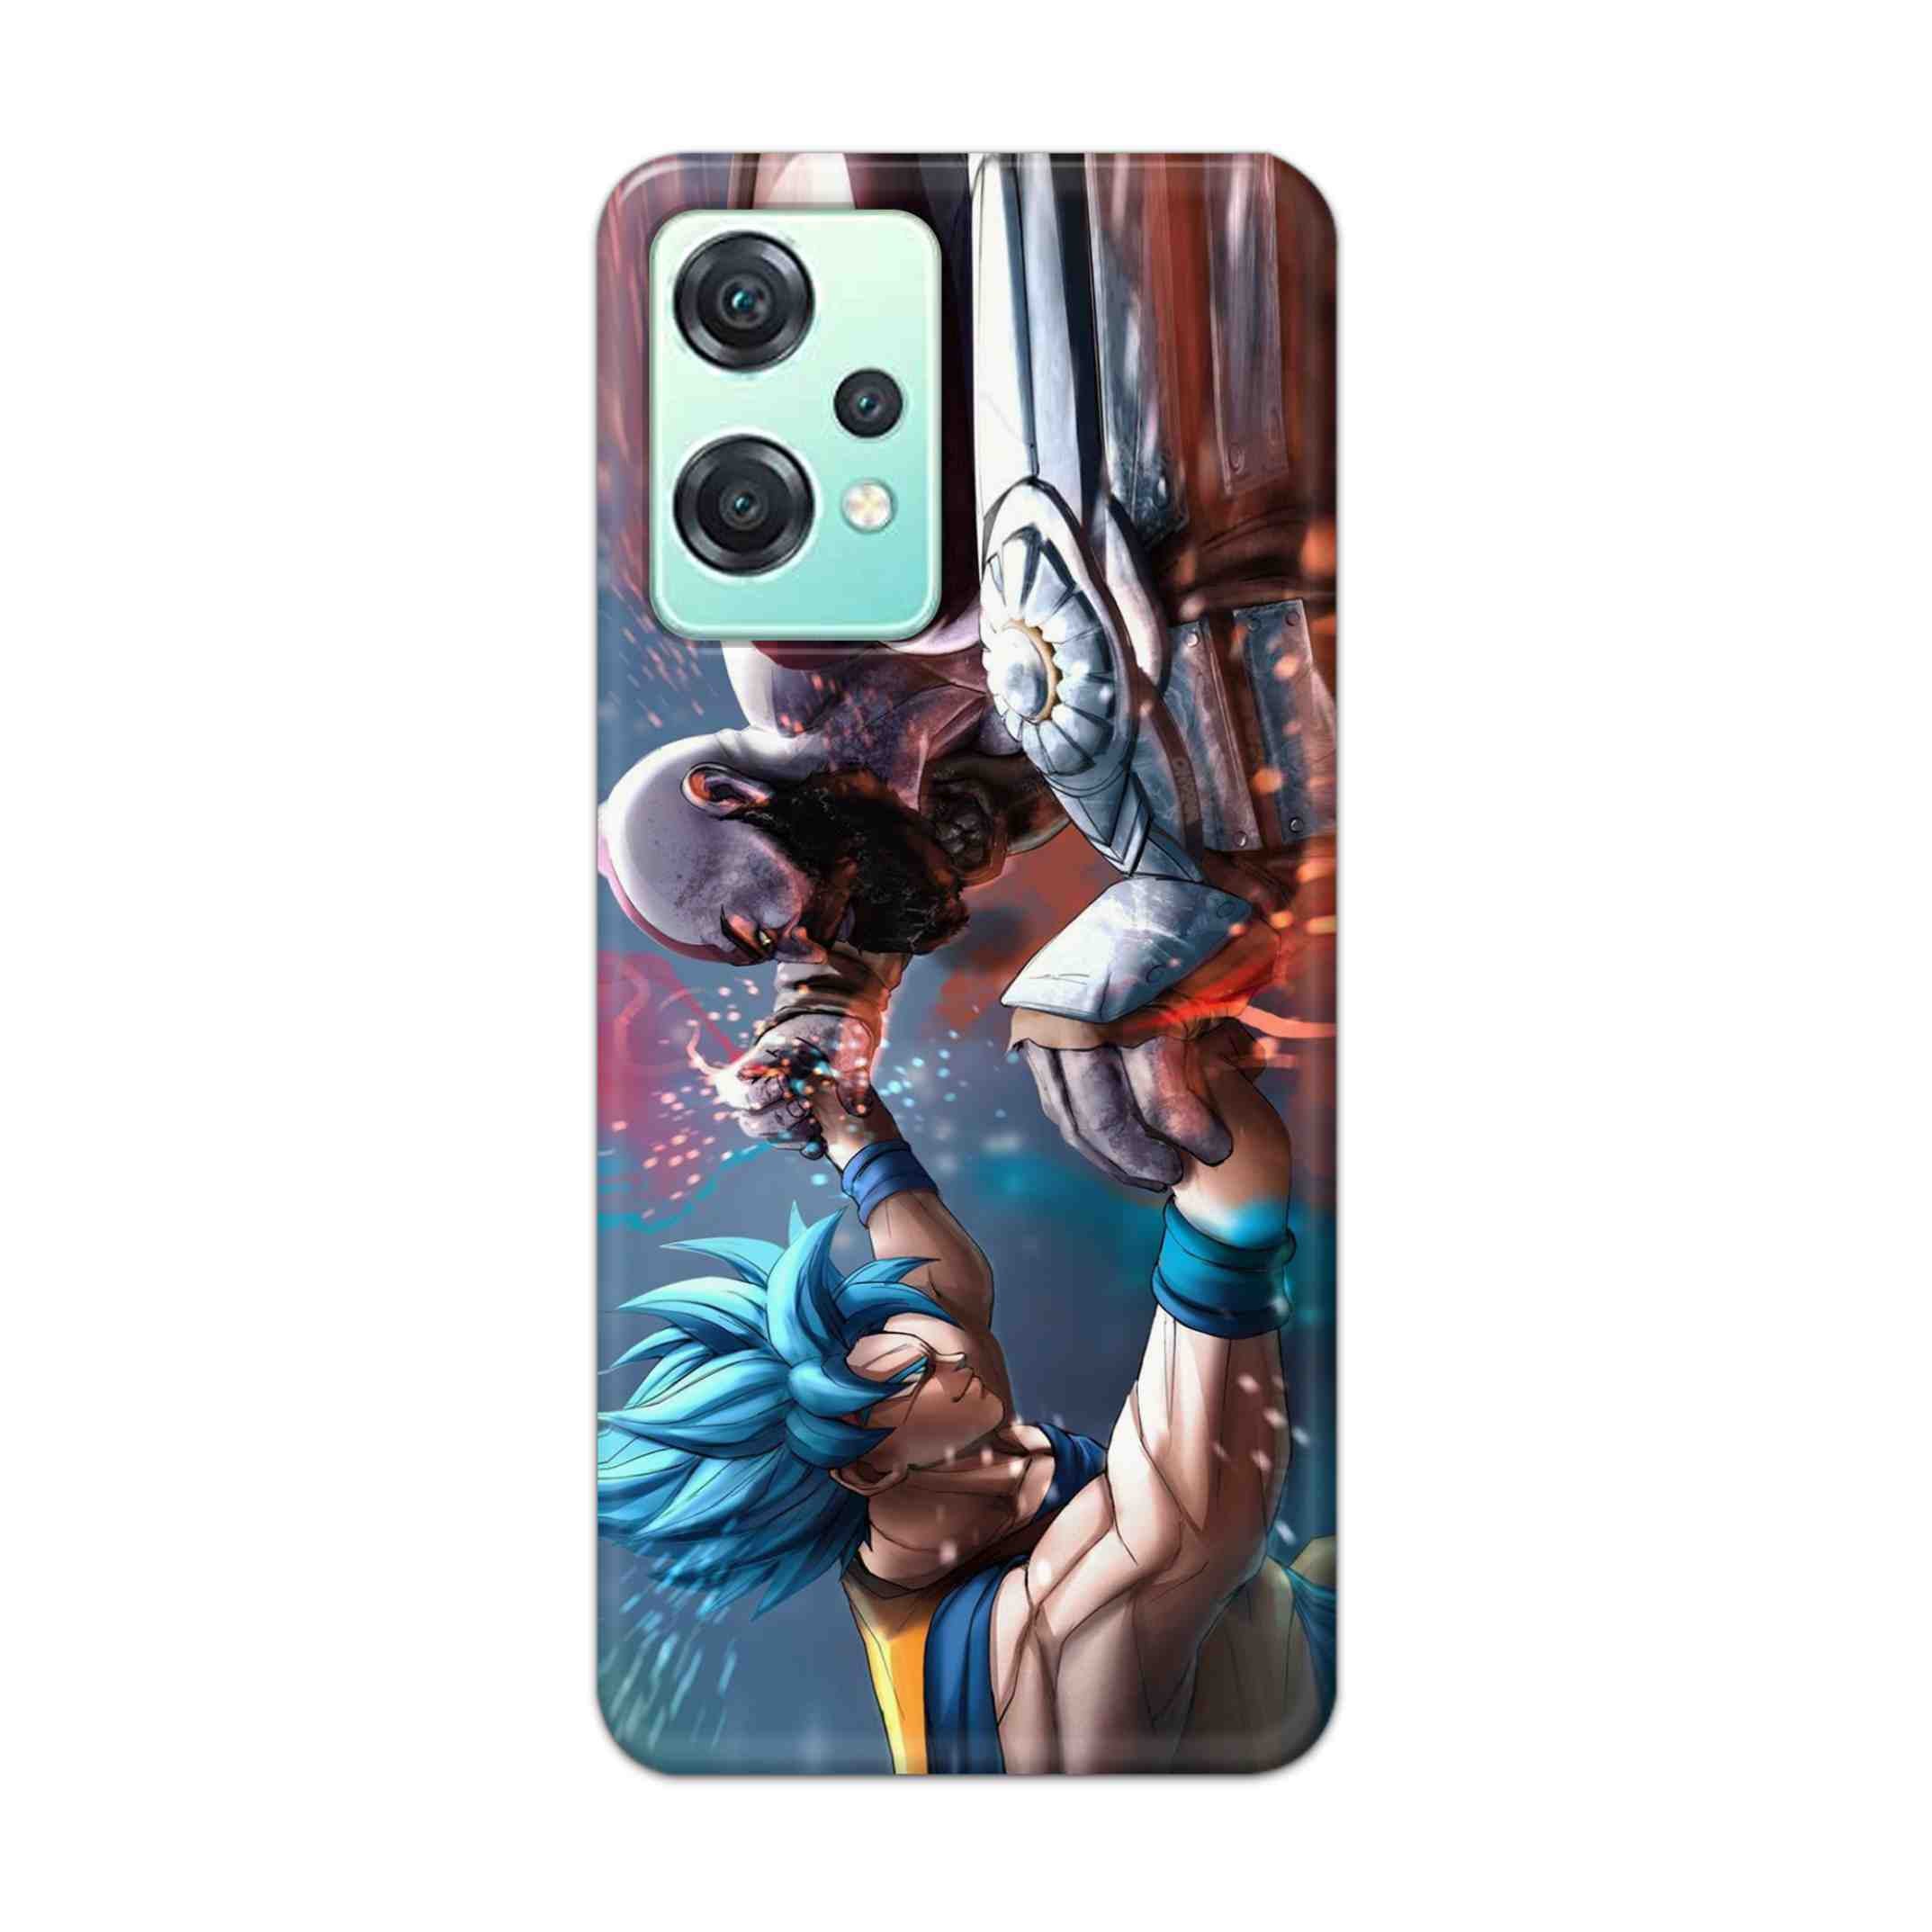 Buy Goku Vs Kratos Hard Back Mobile Phone Case Cover For OnePlus Nord CE 2 Lite 5G Online